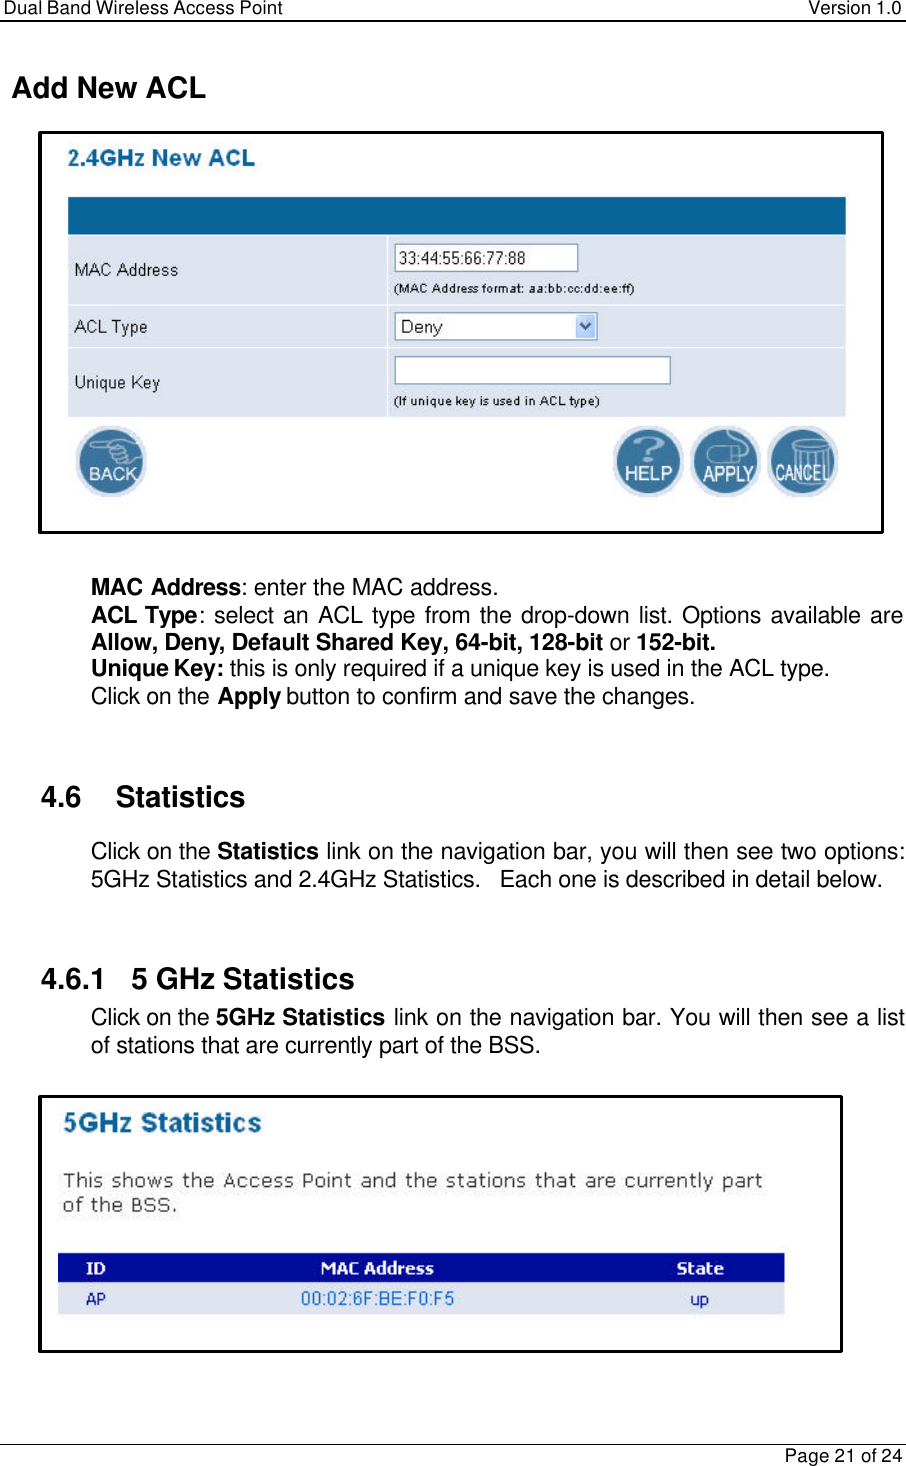 Dual Band Wireless Access Point Version 1.0Page 21 of 24 Add New ACL MAC Address: enter the MAC address. ACL Type: select an ACL type from the drop-down list. Options available areAllow, Deny, Default Shared Key, 64-bit, 128-bit or 152-bit. Unique Key: this is only required if a unique key is used in the ACL type. Click on the Apply button to confirm and save the changes.4.6 Statistics Click on the Statistics link on the navigation bar, you will then see two options:5GHz Statistics and 2.4GHz Statistics.   Each one is described in detail below.4.6.1   5 GHz Statistics Click on the 5GHz Statistics link on the navigation bar. You will then see a listof stations that are currently part of the BSS.